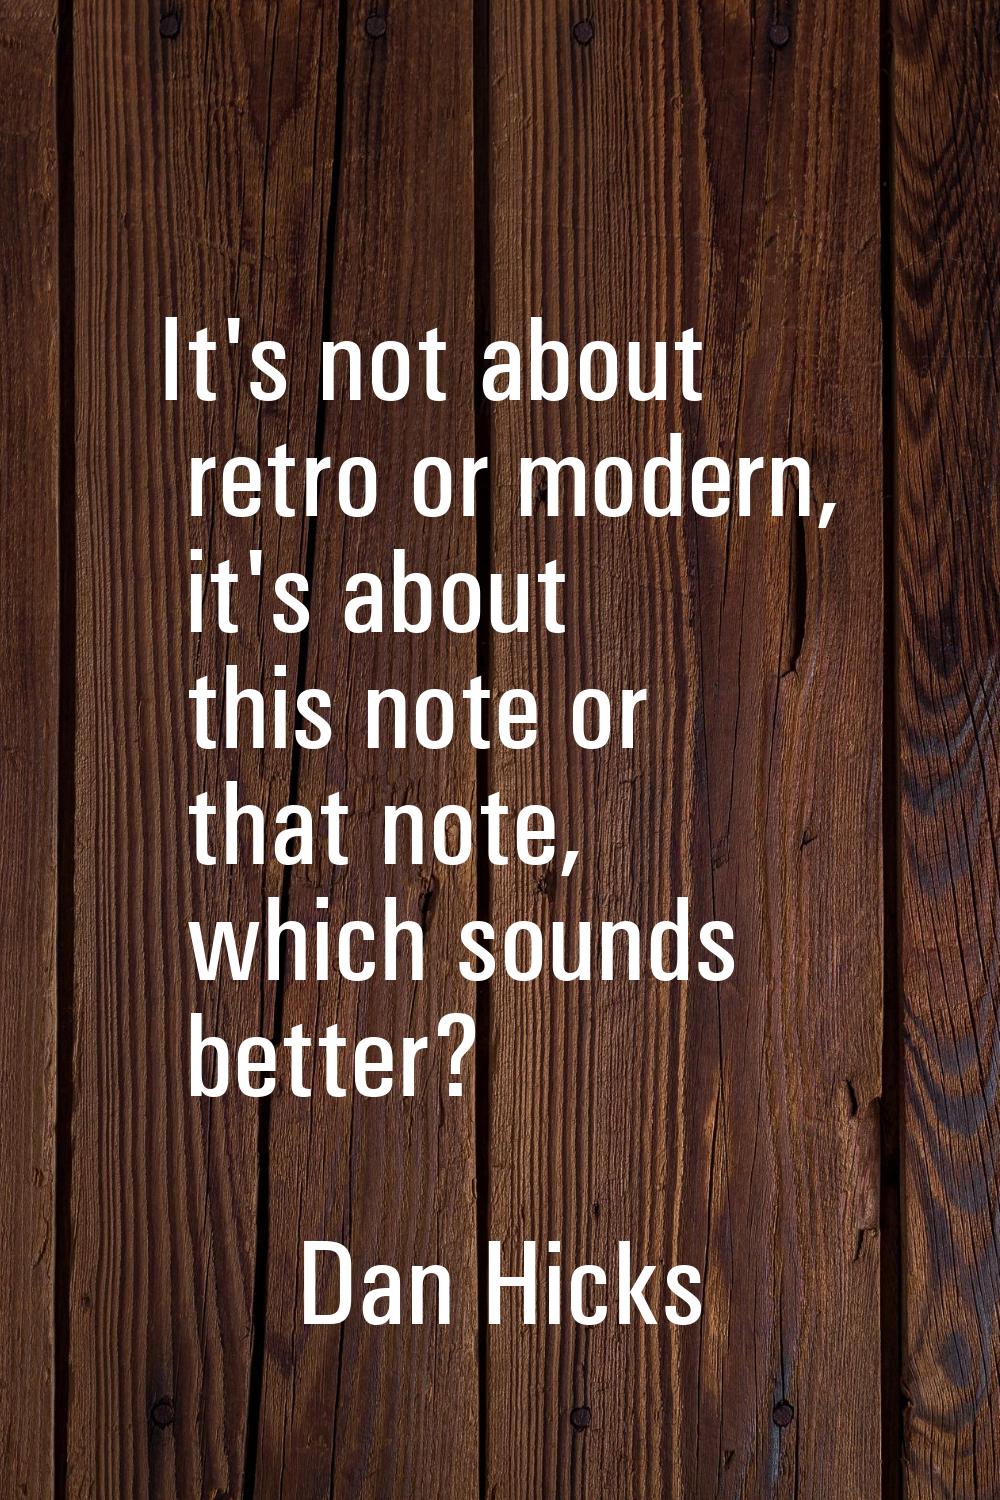 It's not about retro or modern, it's about this note or that note, which sounds better?